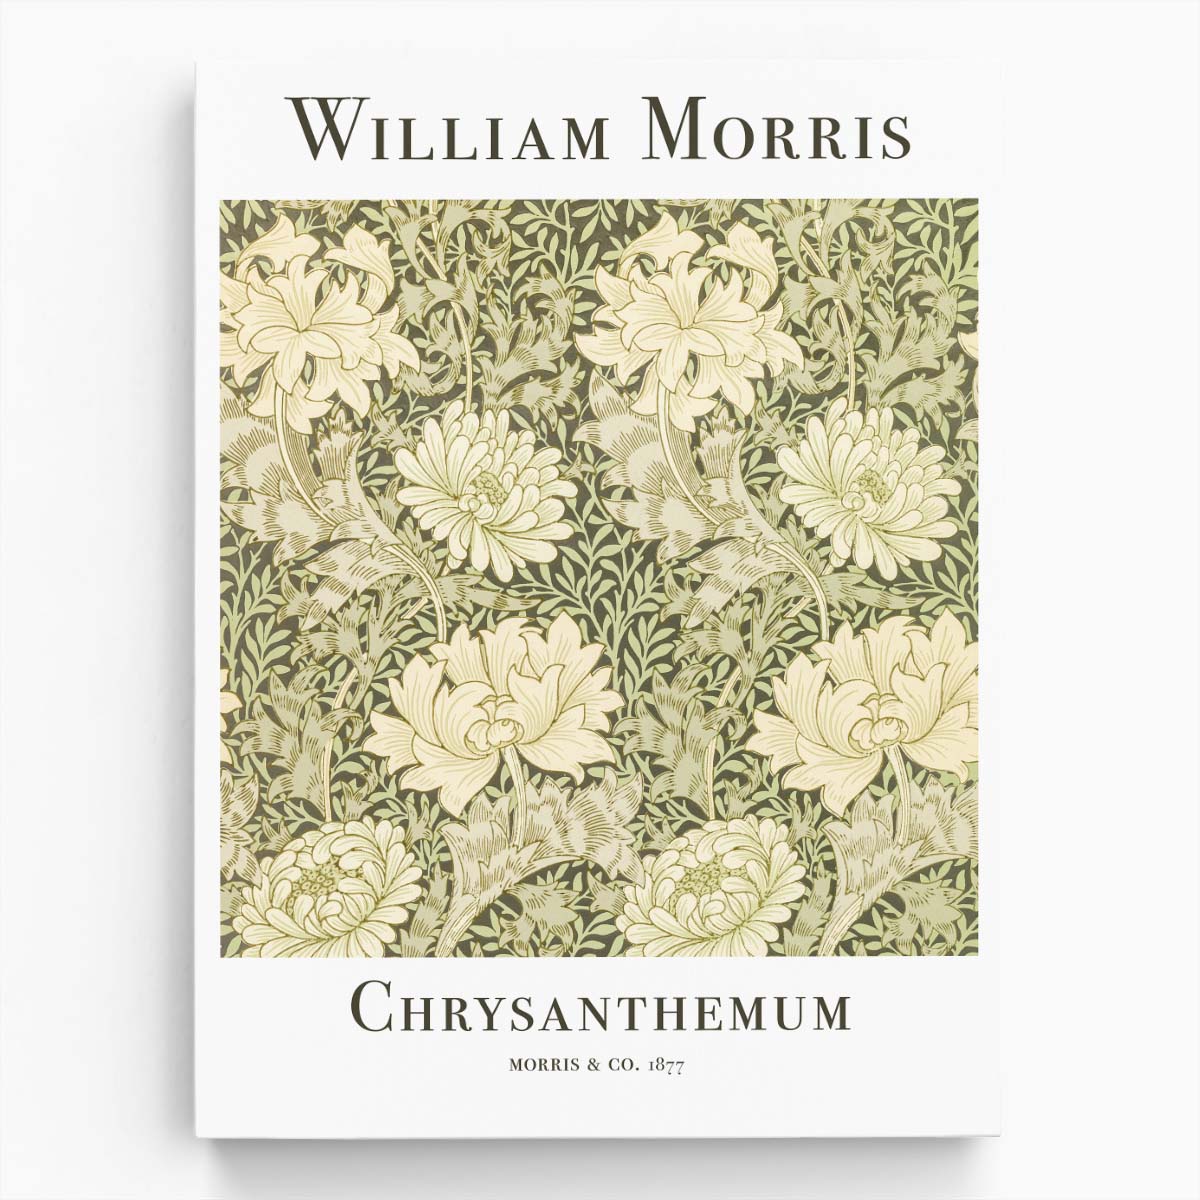 Vintage William Morris Chrysanthemum Botanical Illustration Wall Art Poster by Luxuriance Designs, made in USA